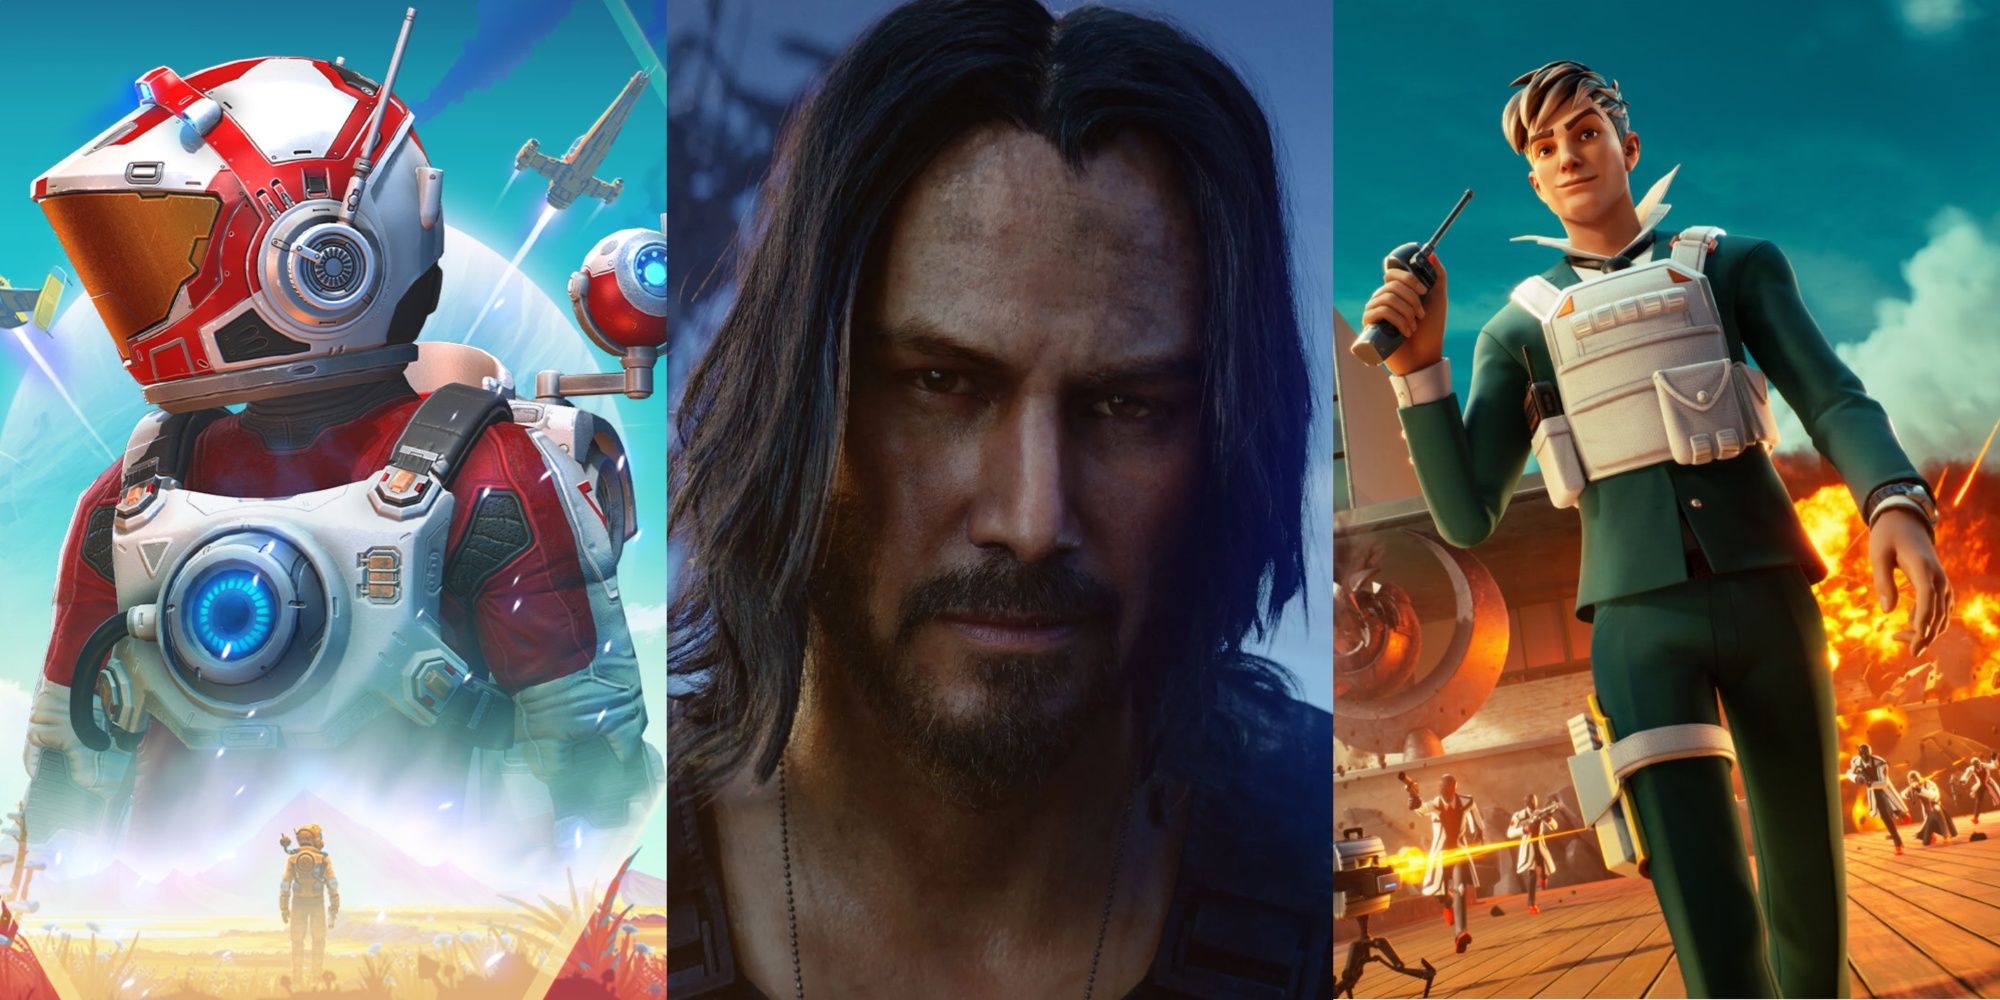 Games That Made a Comeback: No Man's Sky, Johnny Silverhand from Cyberpunk 2077, and Fortnite artwork